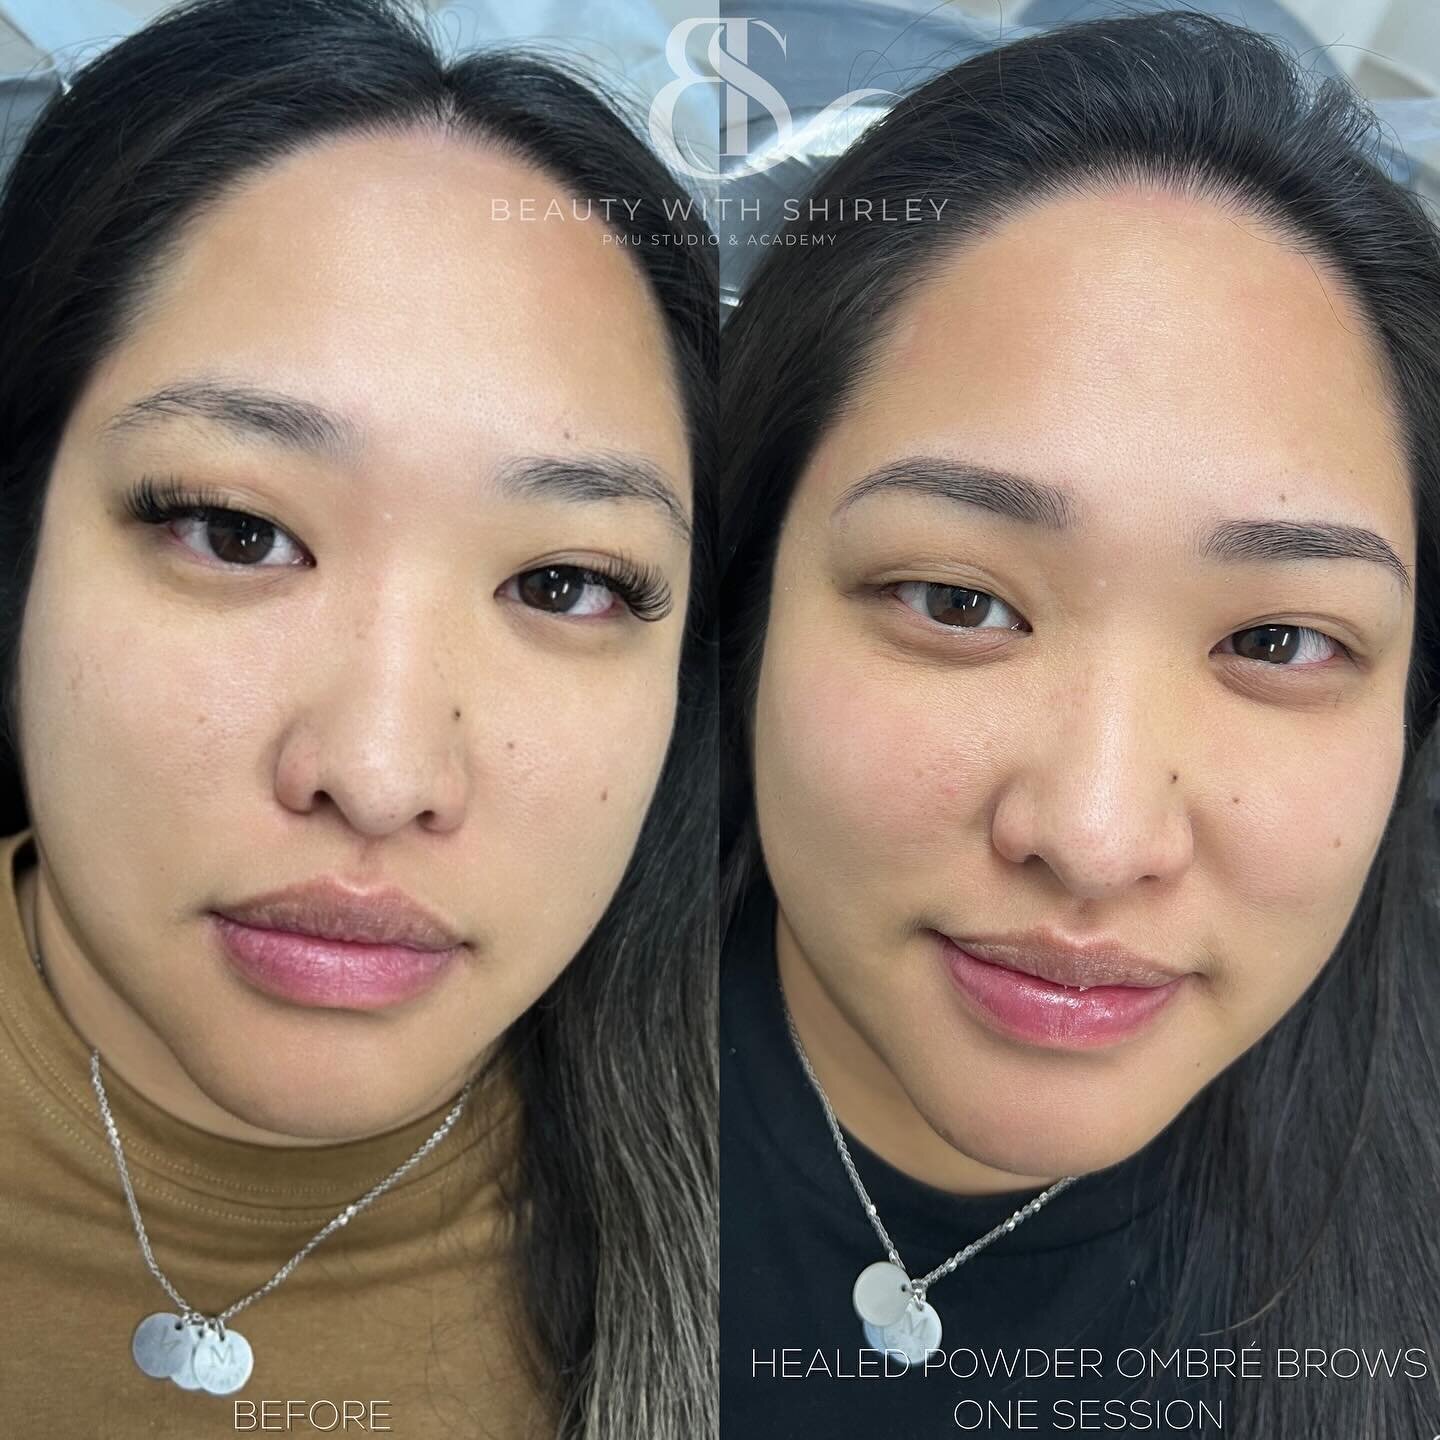 Here is a side by side of how brows can make such a difference in your whole look.

Powder ombr&eacute; brows done by @beautywithshirley 

When this technique is done correctly by a brow specialist, healed results will look natural and not look like 